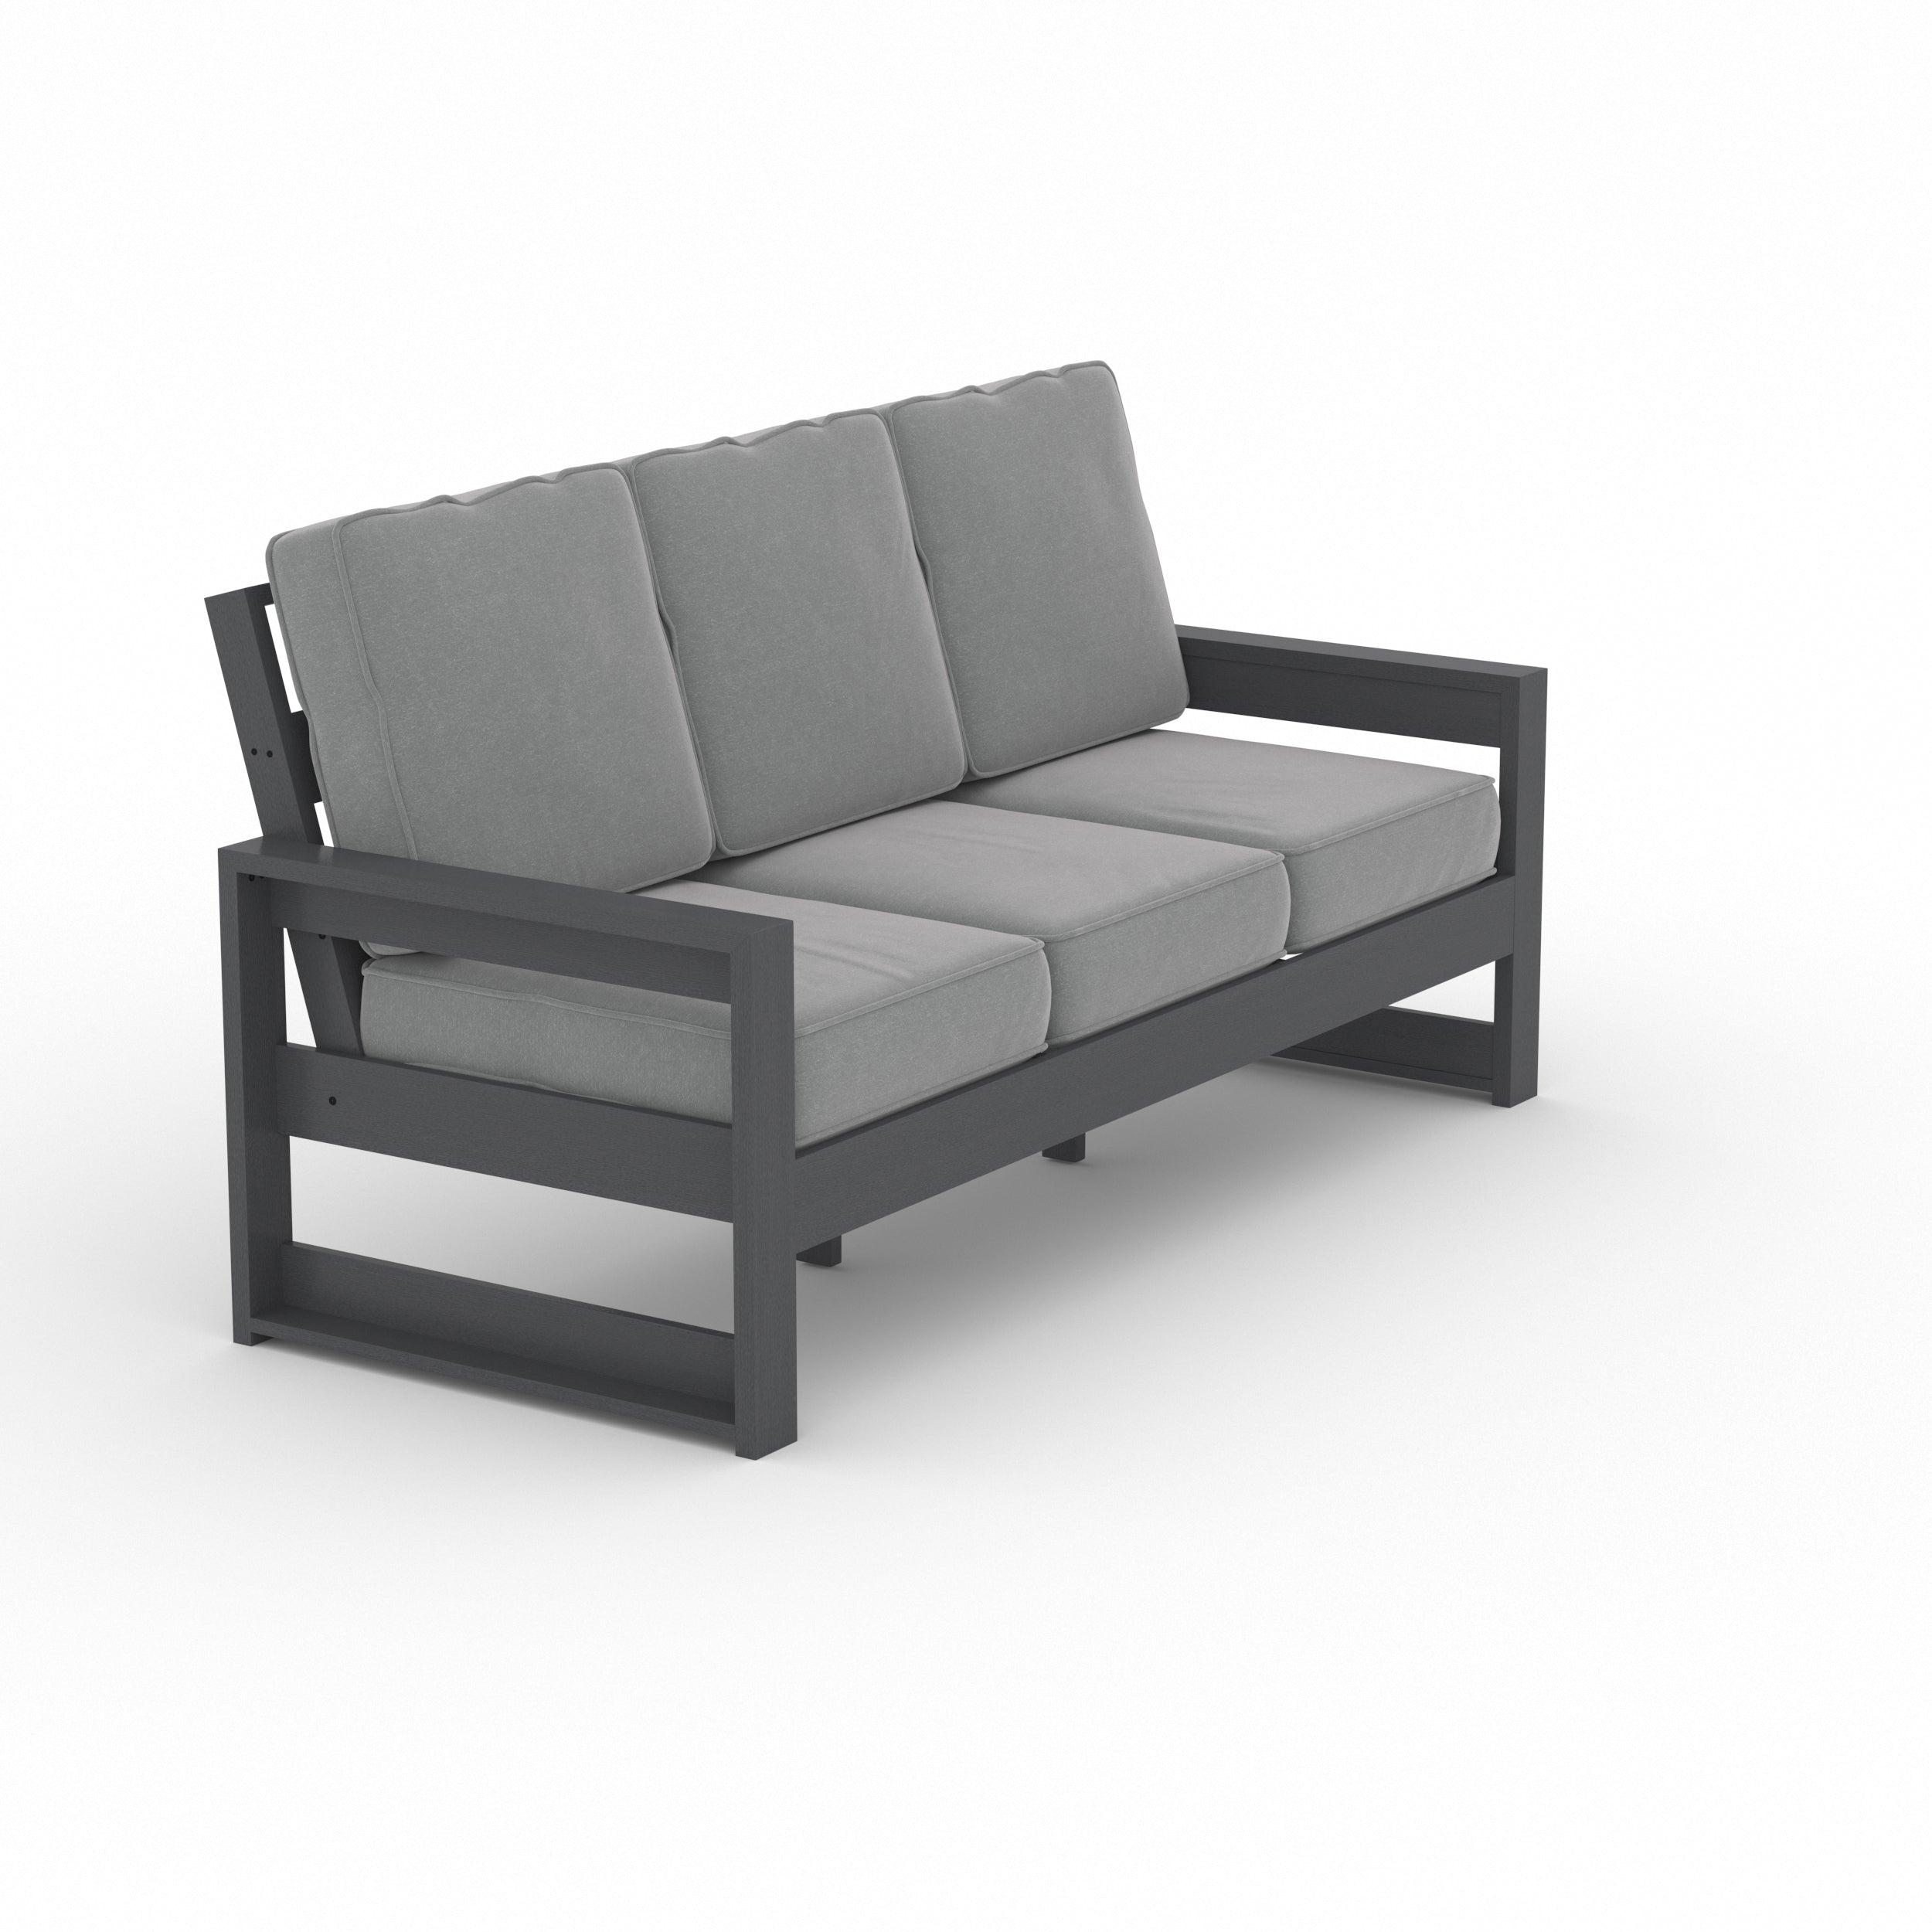 LuXeo Pacifica Deep Seating Sofa Set